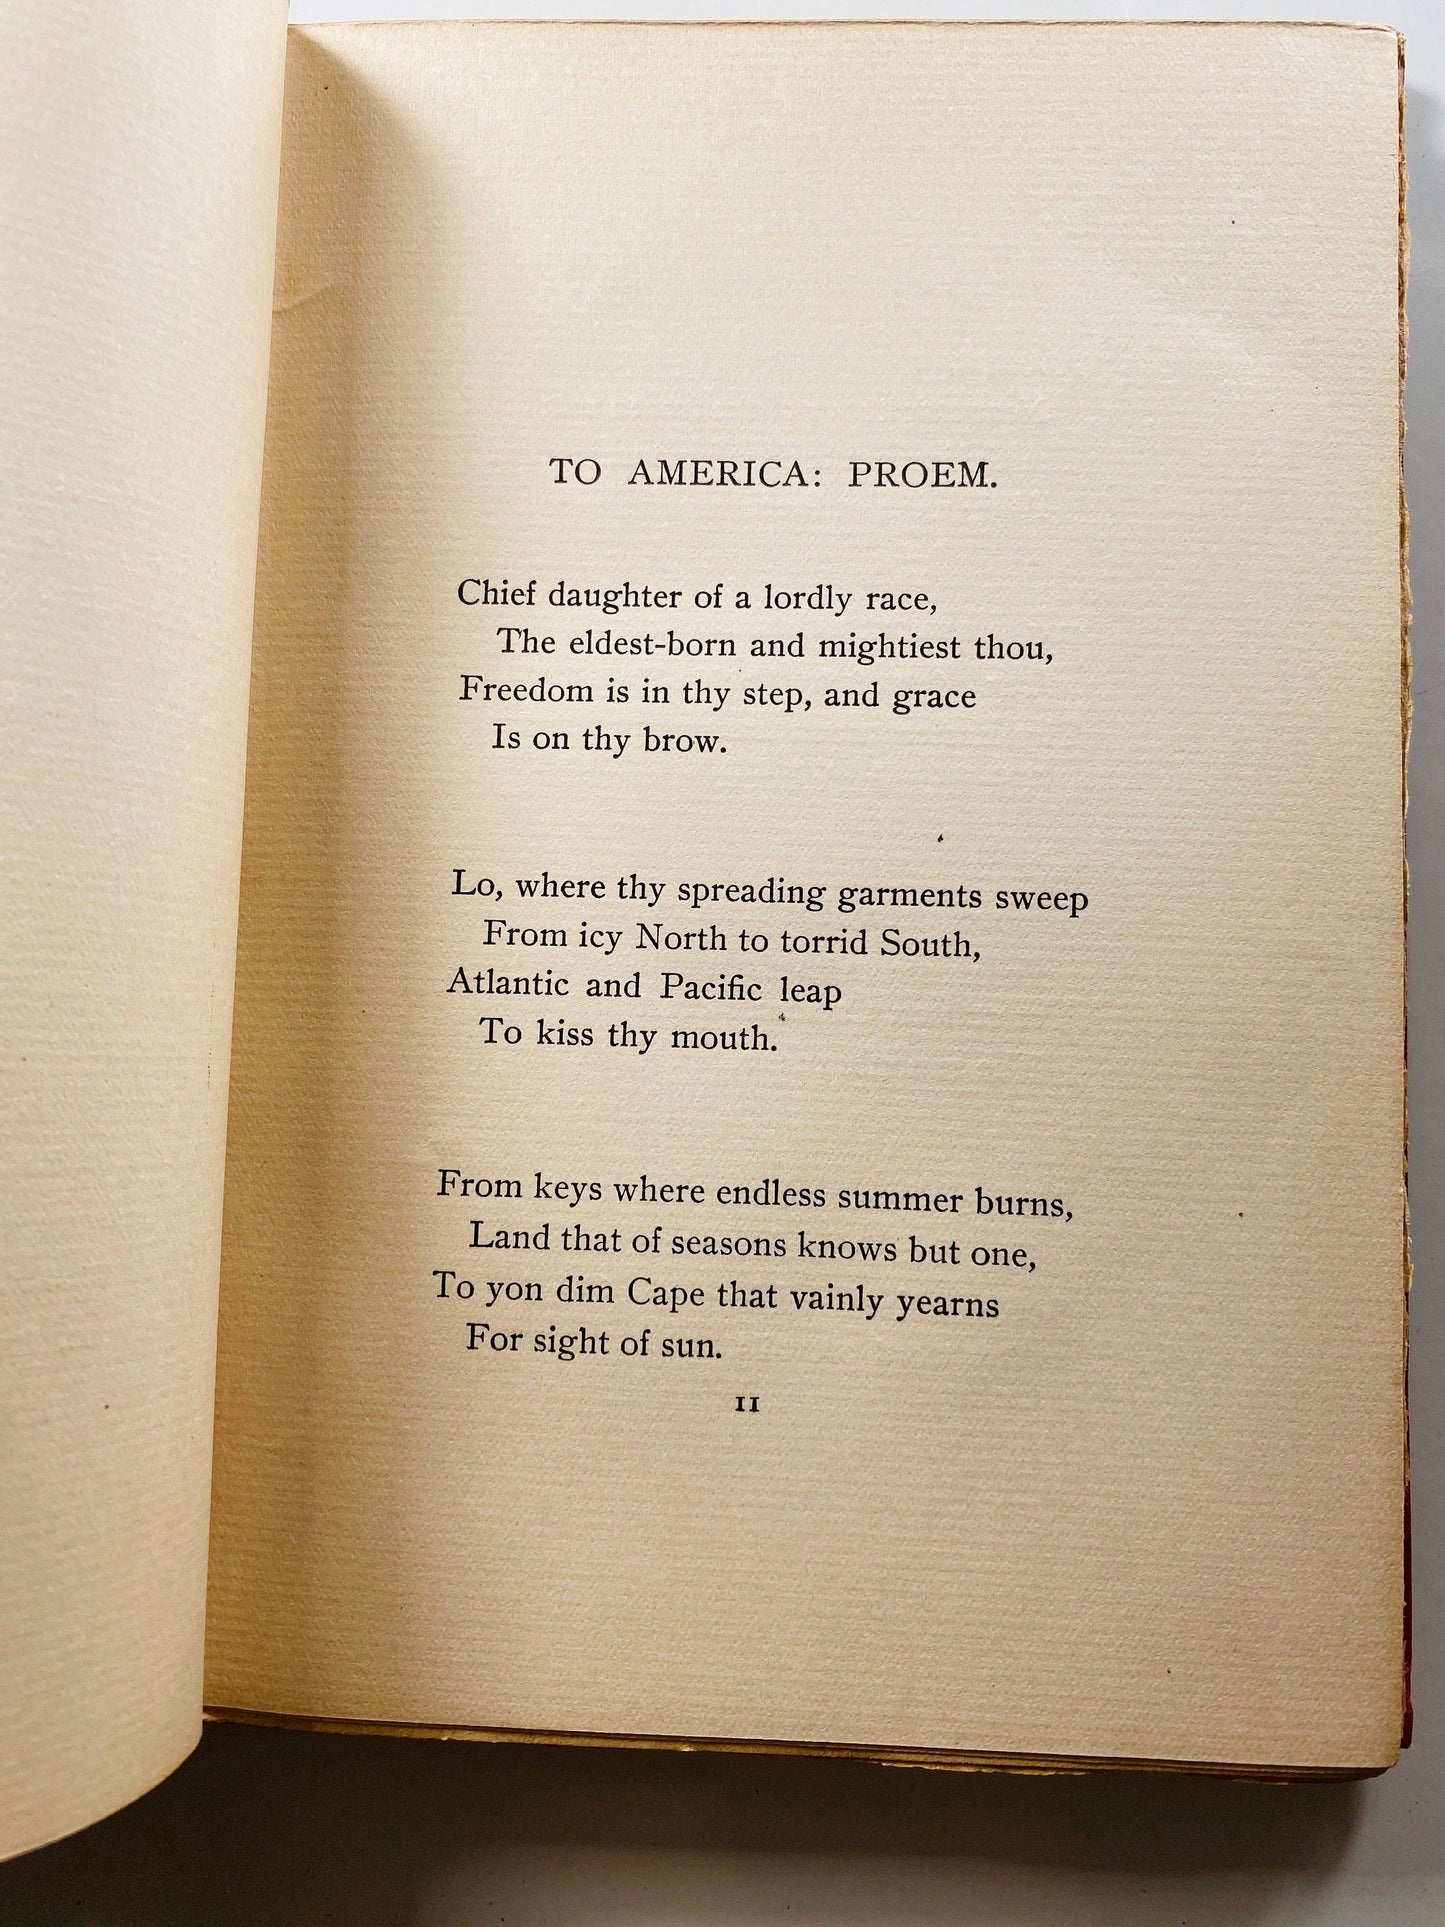 Alamo FIRST EDITION vintage book circa 1898 published by Edward McQueen Gray antique poetry Texas Southwest gift